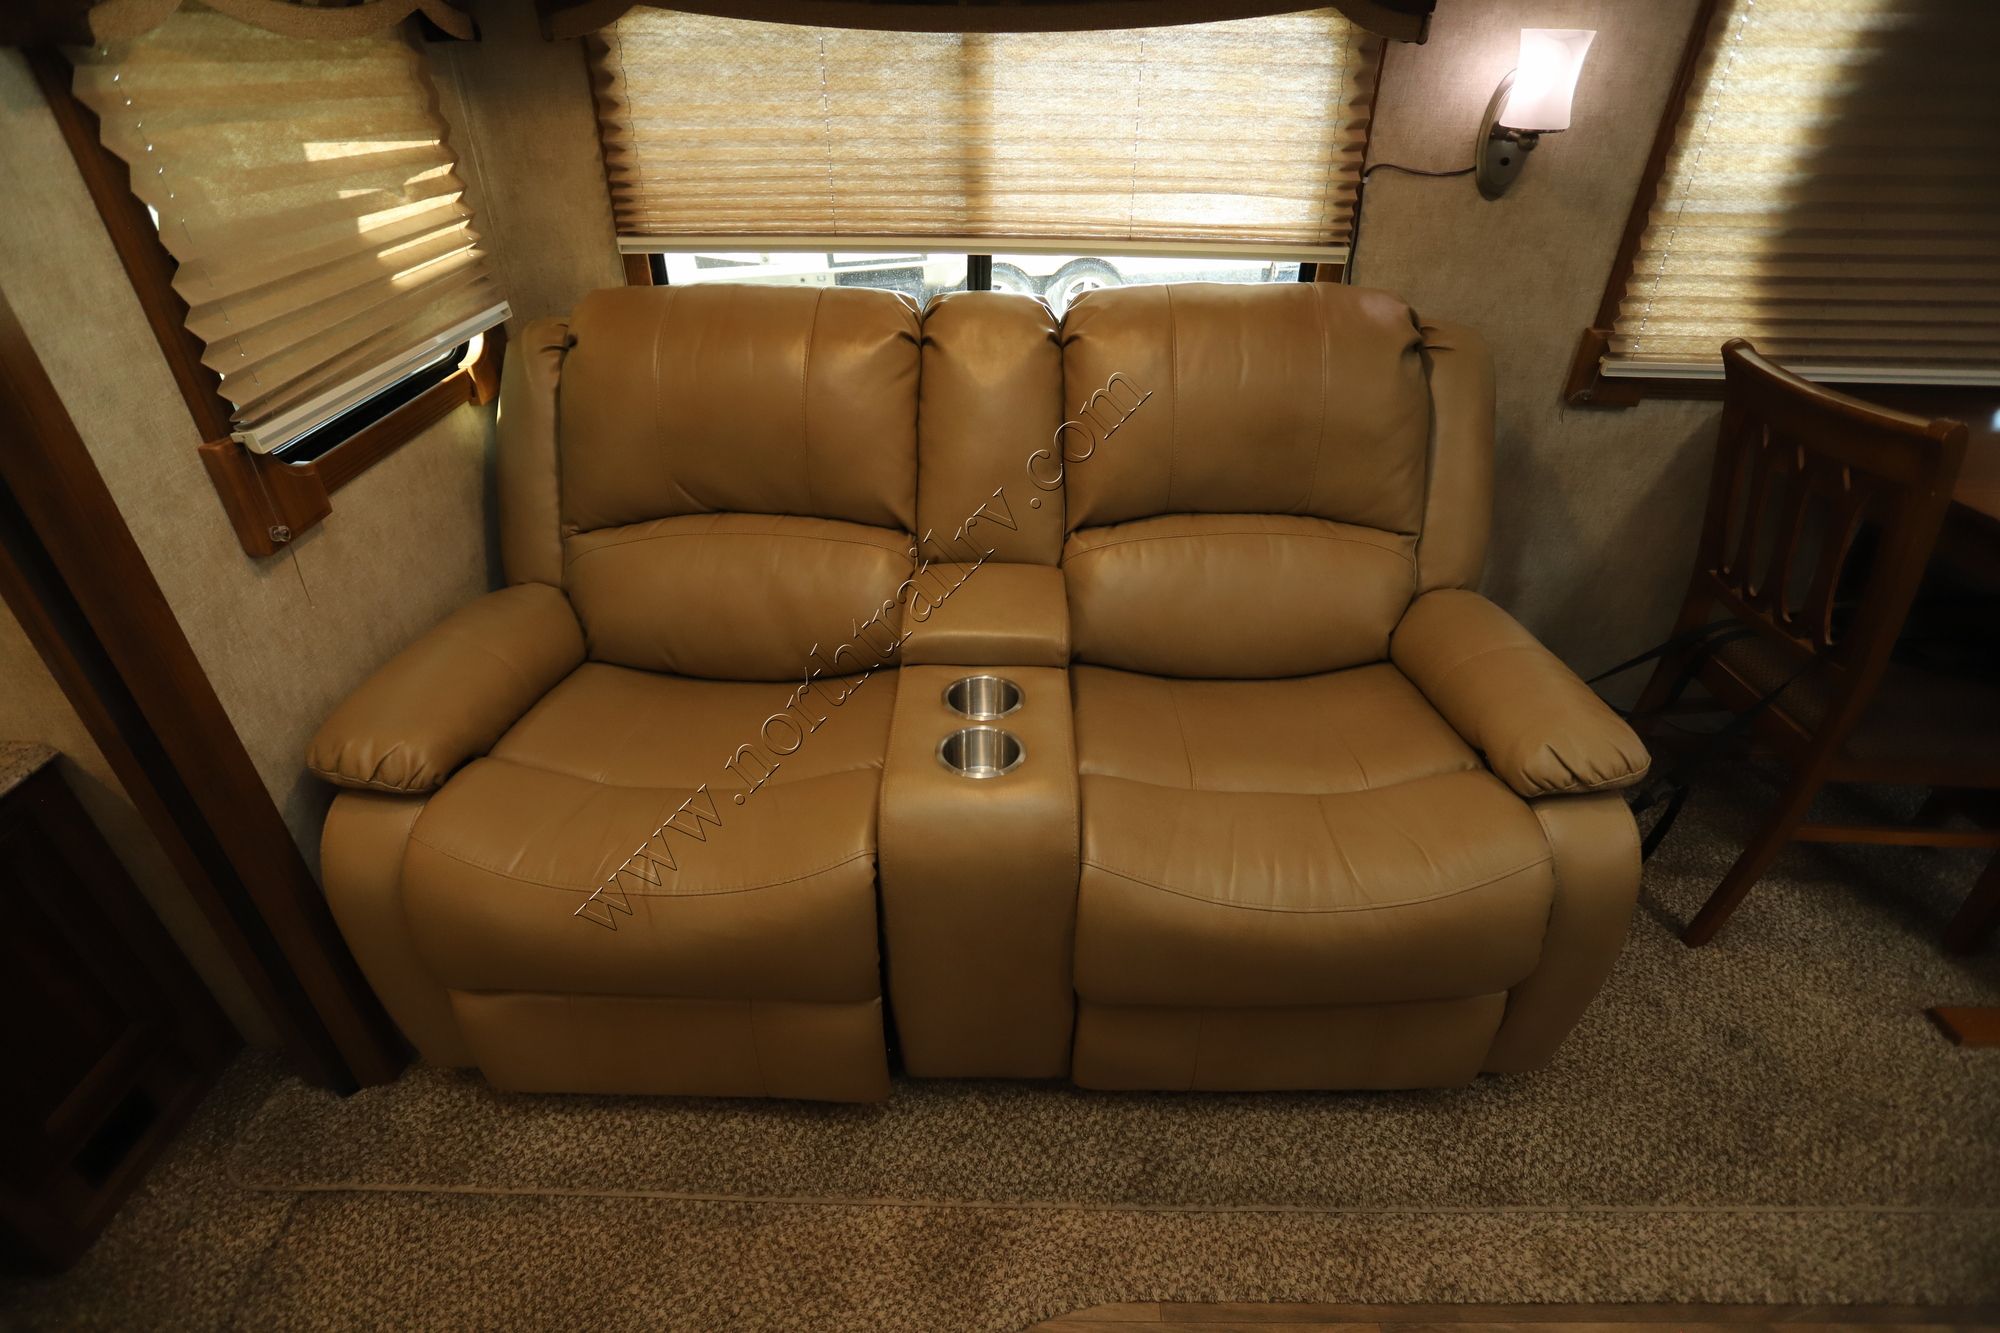 Used 2015 Prime Time Crusader 295RST Fifth Wheel  For Sale